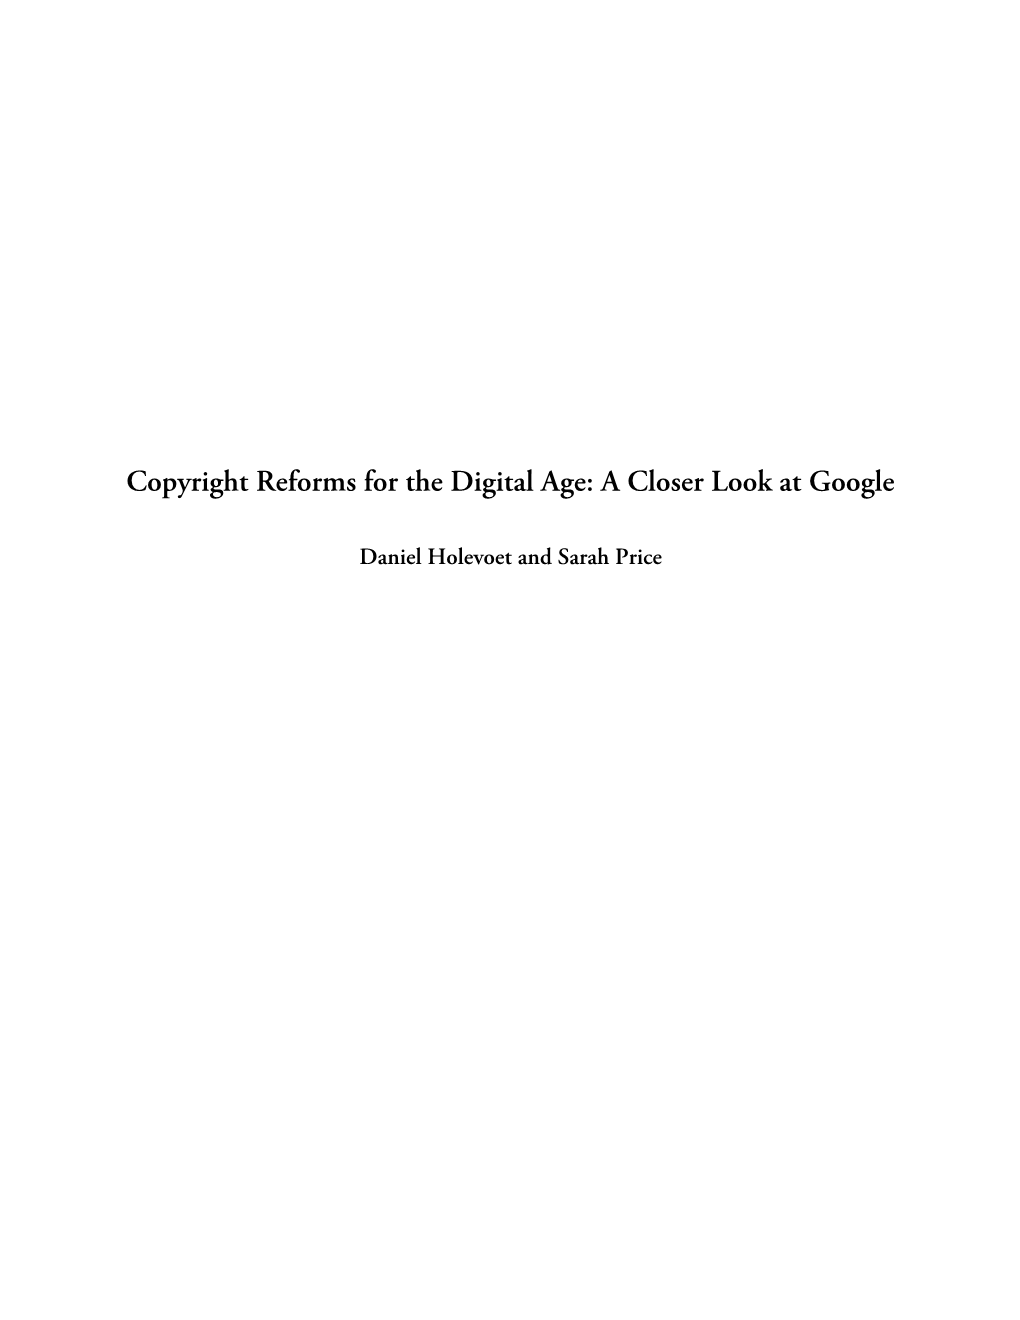 Copyright Reforms for the Digital Age: a Closer Look at Google